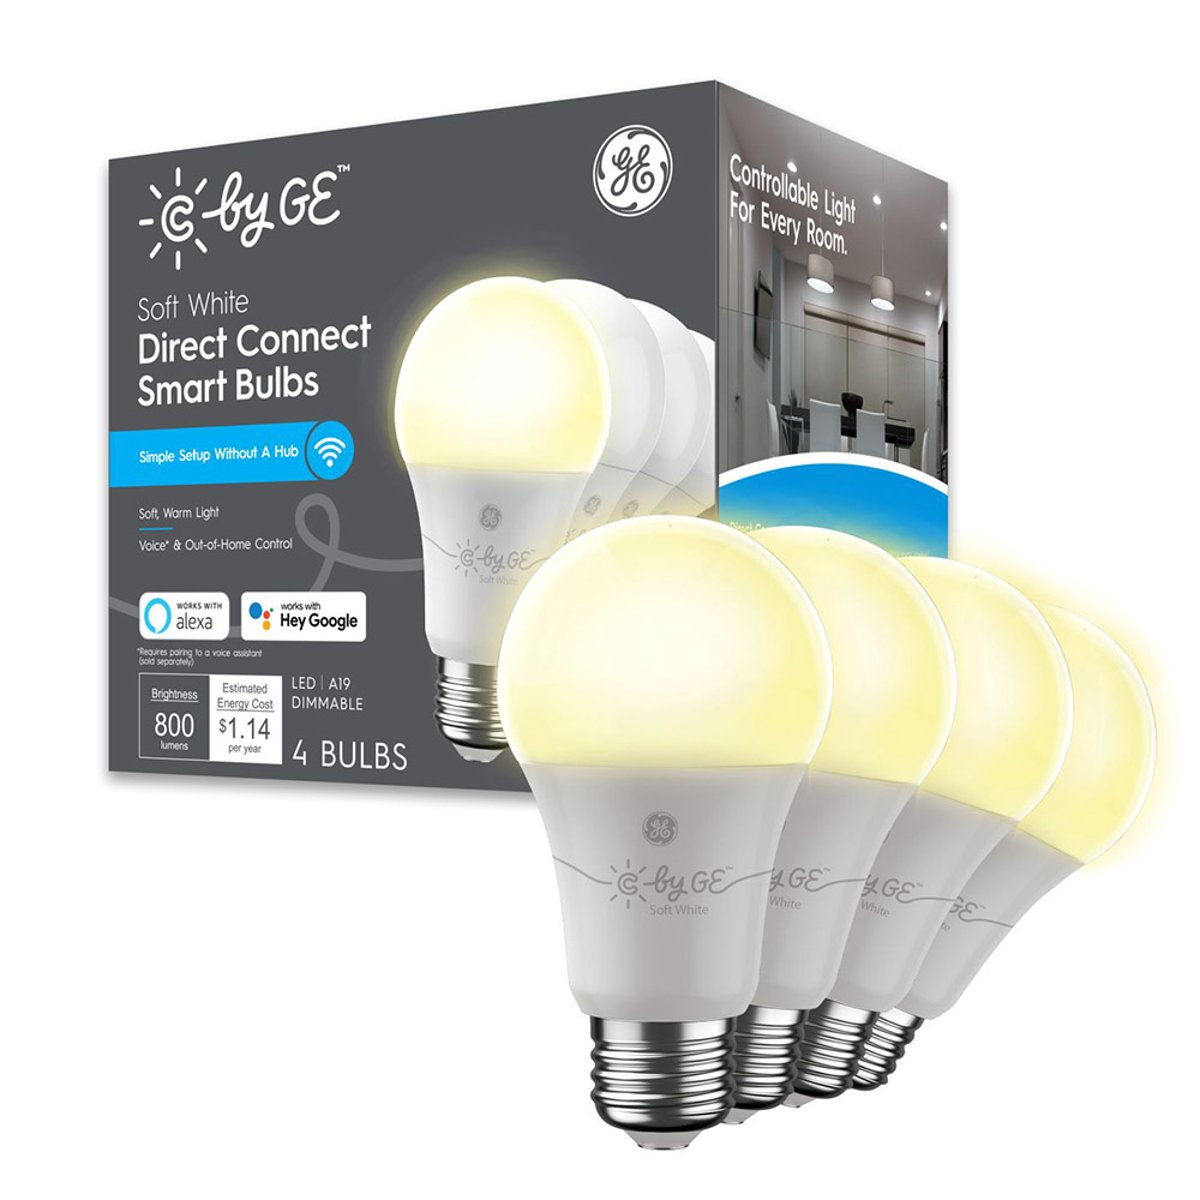 Struggle Bruise Suitable Cync by GE Soft White Direct Connect Smart Bulbs (4 LED A19 Light Bulbs) |  Verishop